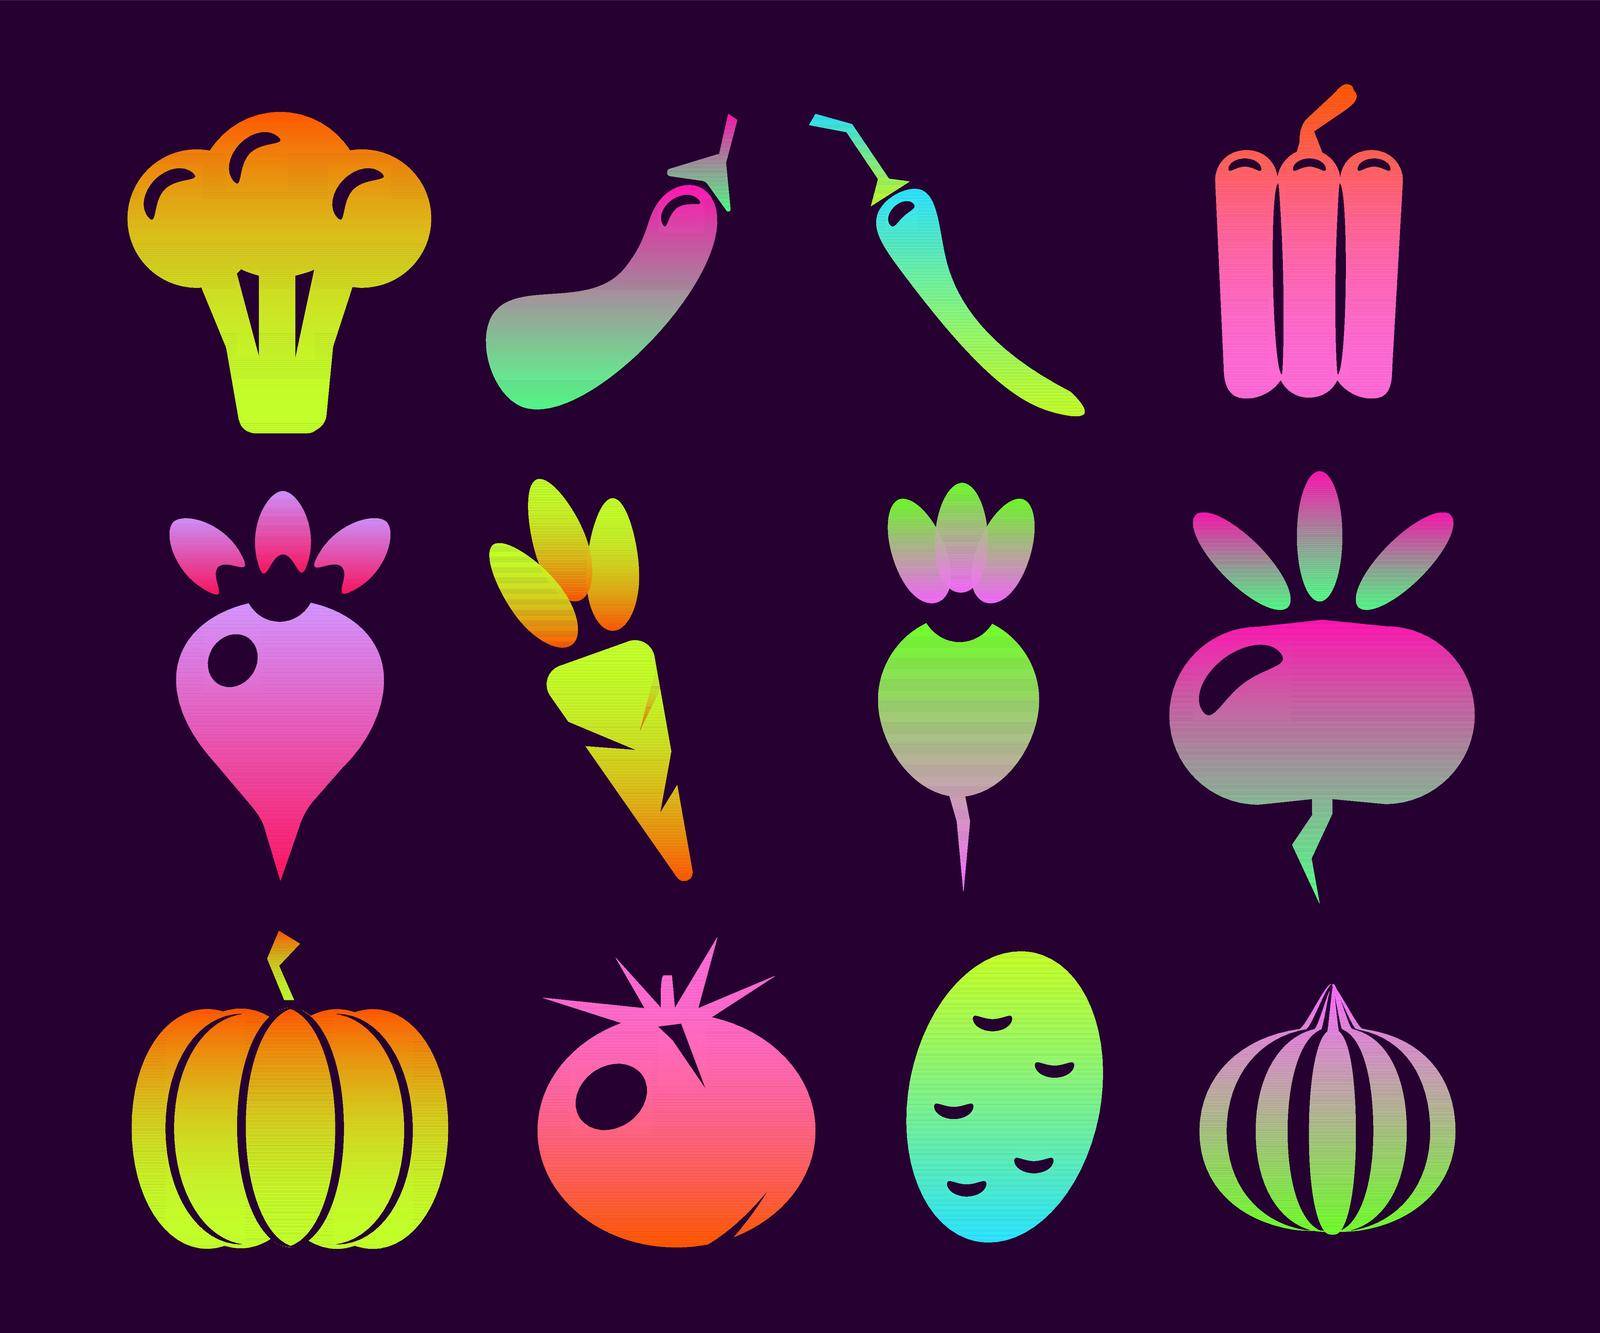 Vegetables icons set. Illustration of 12 vegetables vector icons neon color on purple